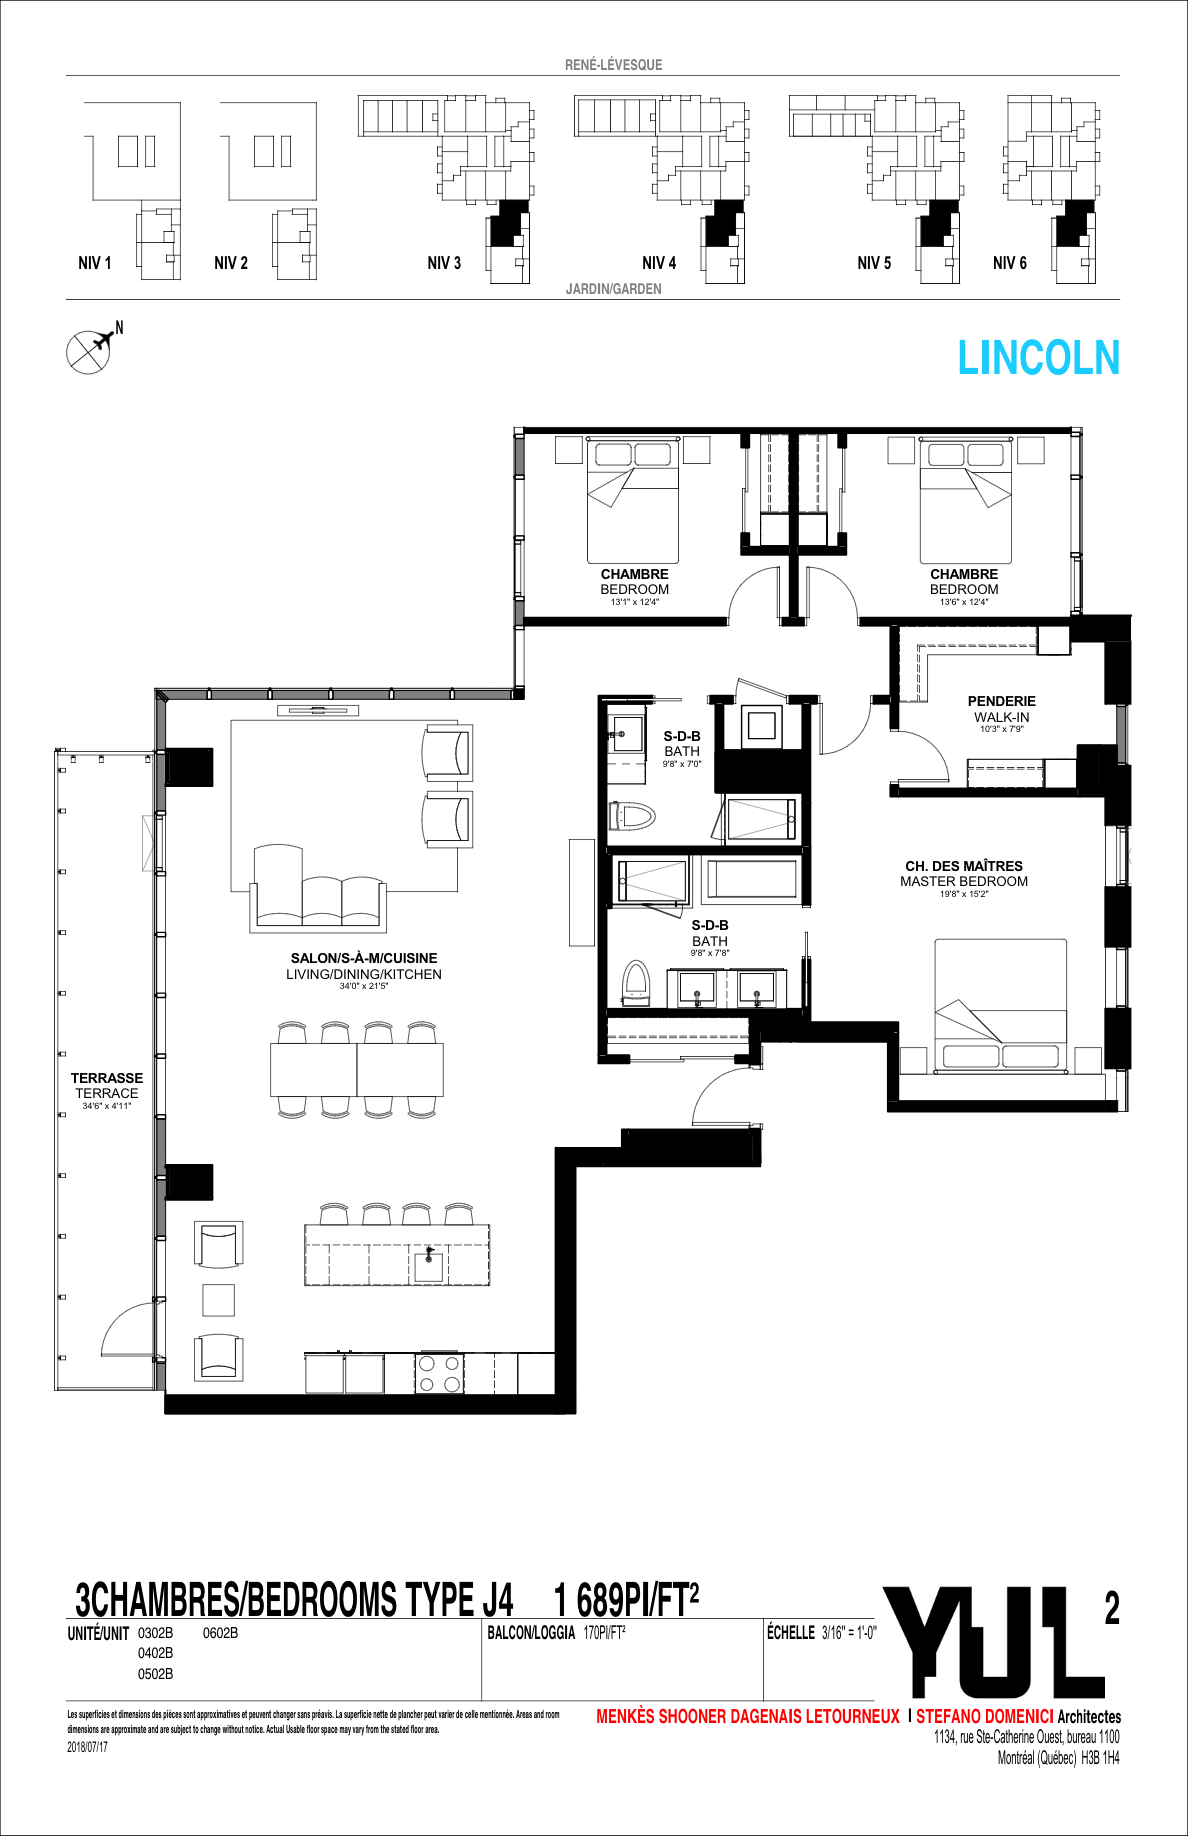  Floor Plan of YUL Centre-ville Condos with undefined beds